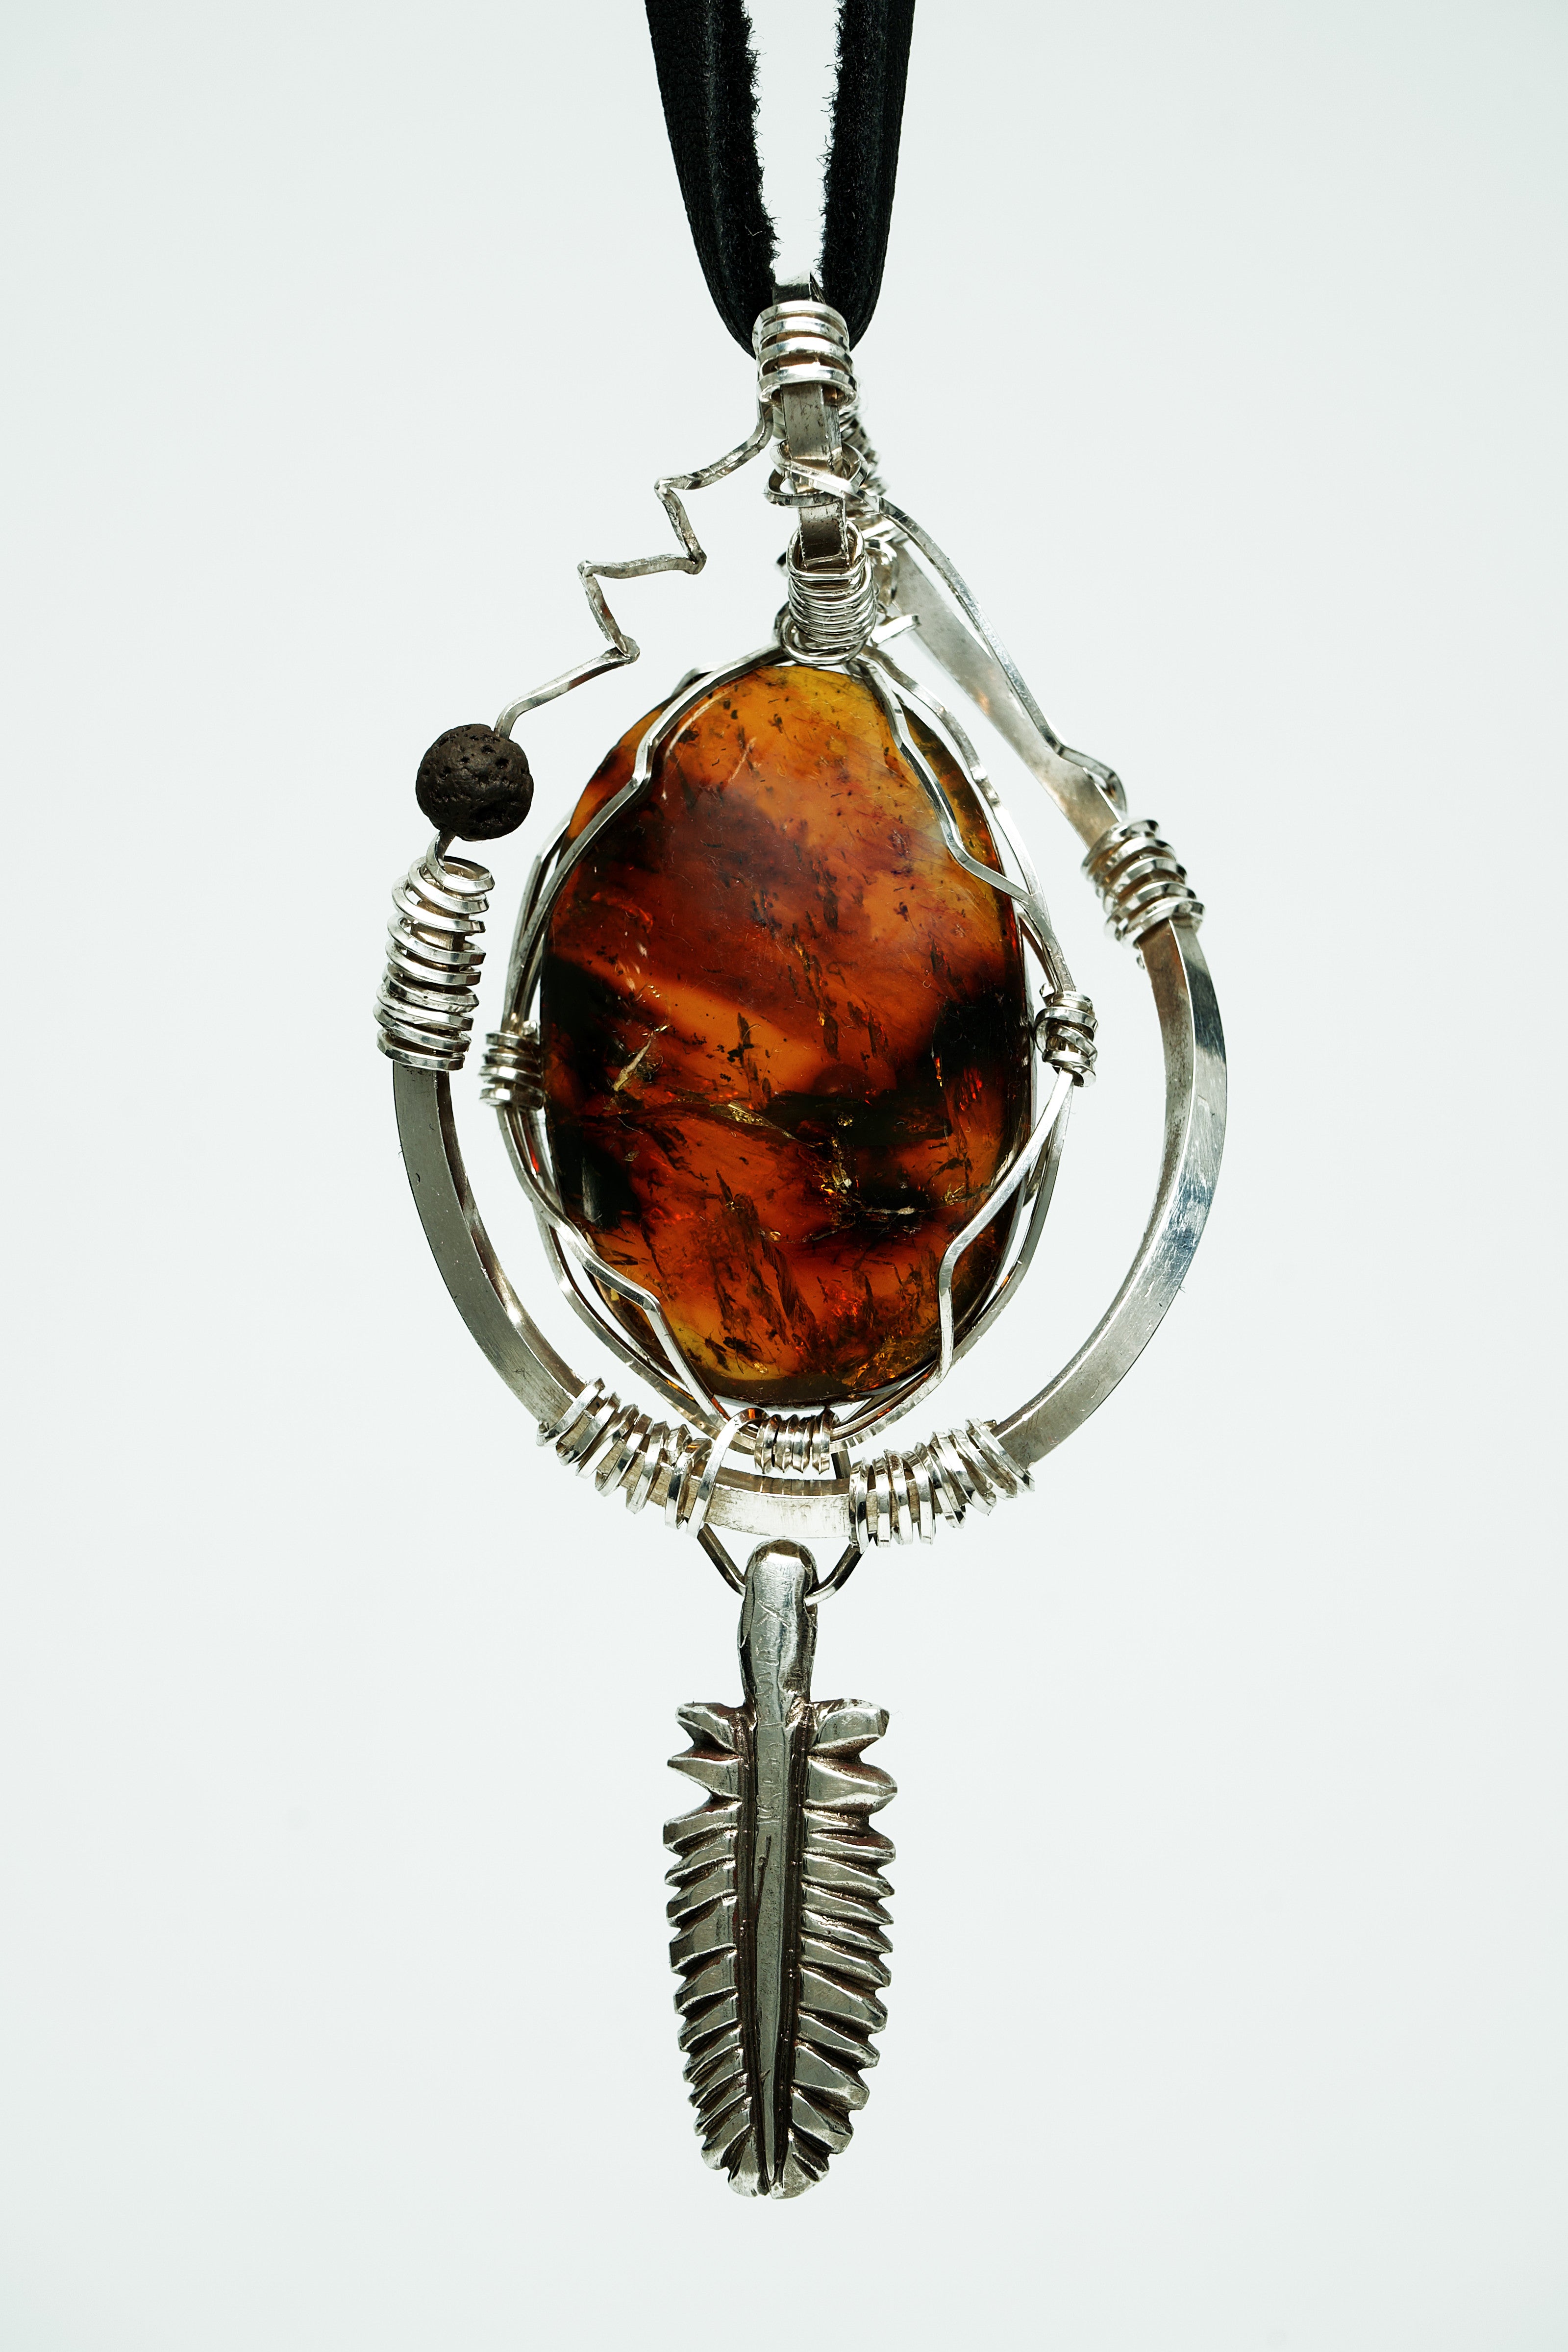 Frozen Time (Amber, Sterling Silver Pendant)